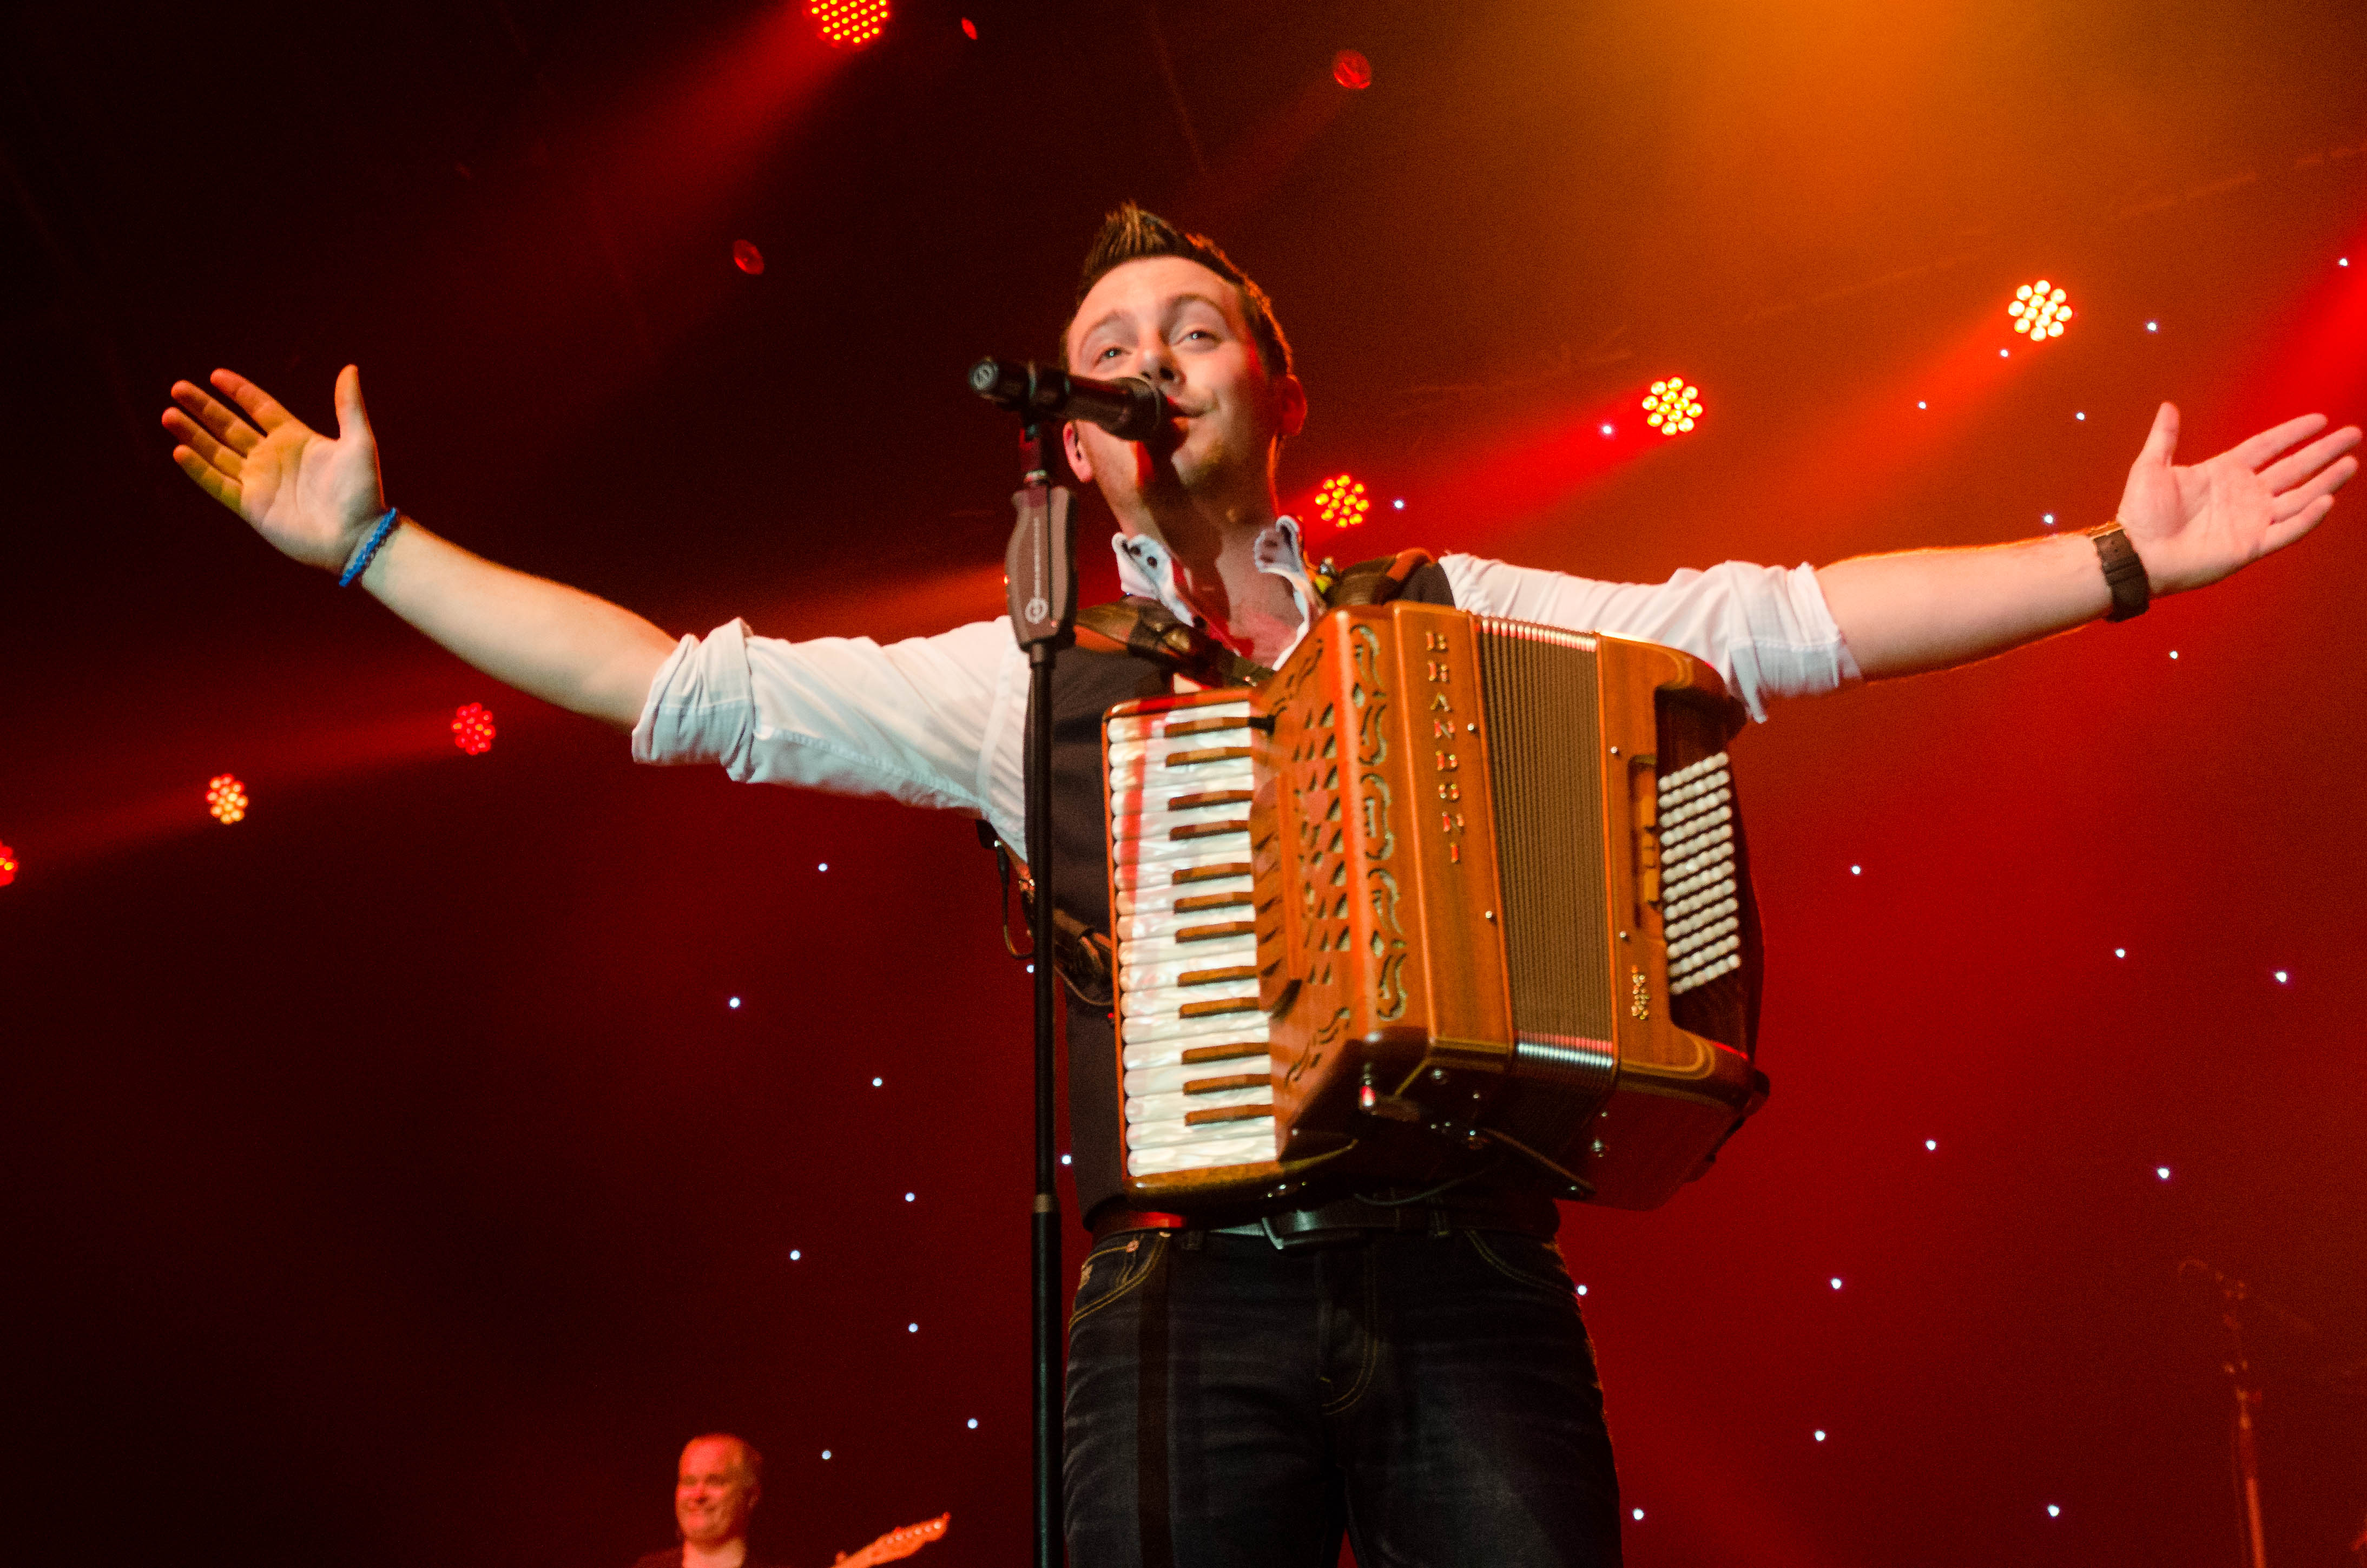 nathan-carter-at-the-marquee-cork-by-sean-smyth-15-6-14-19-of-55